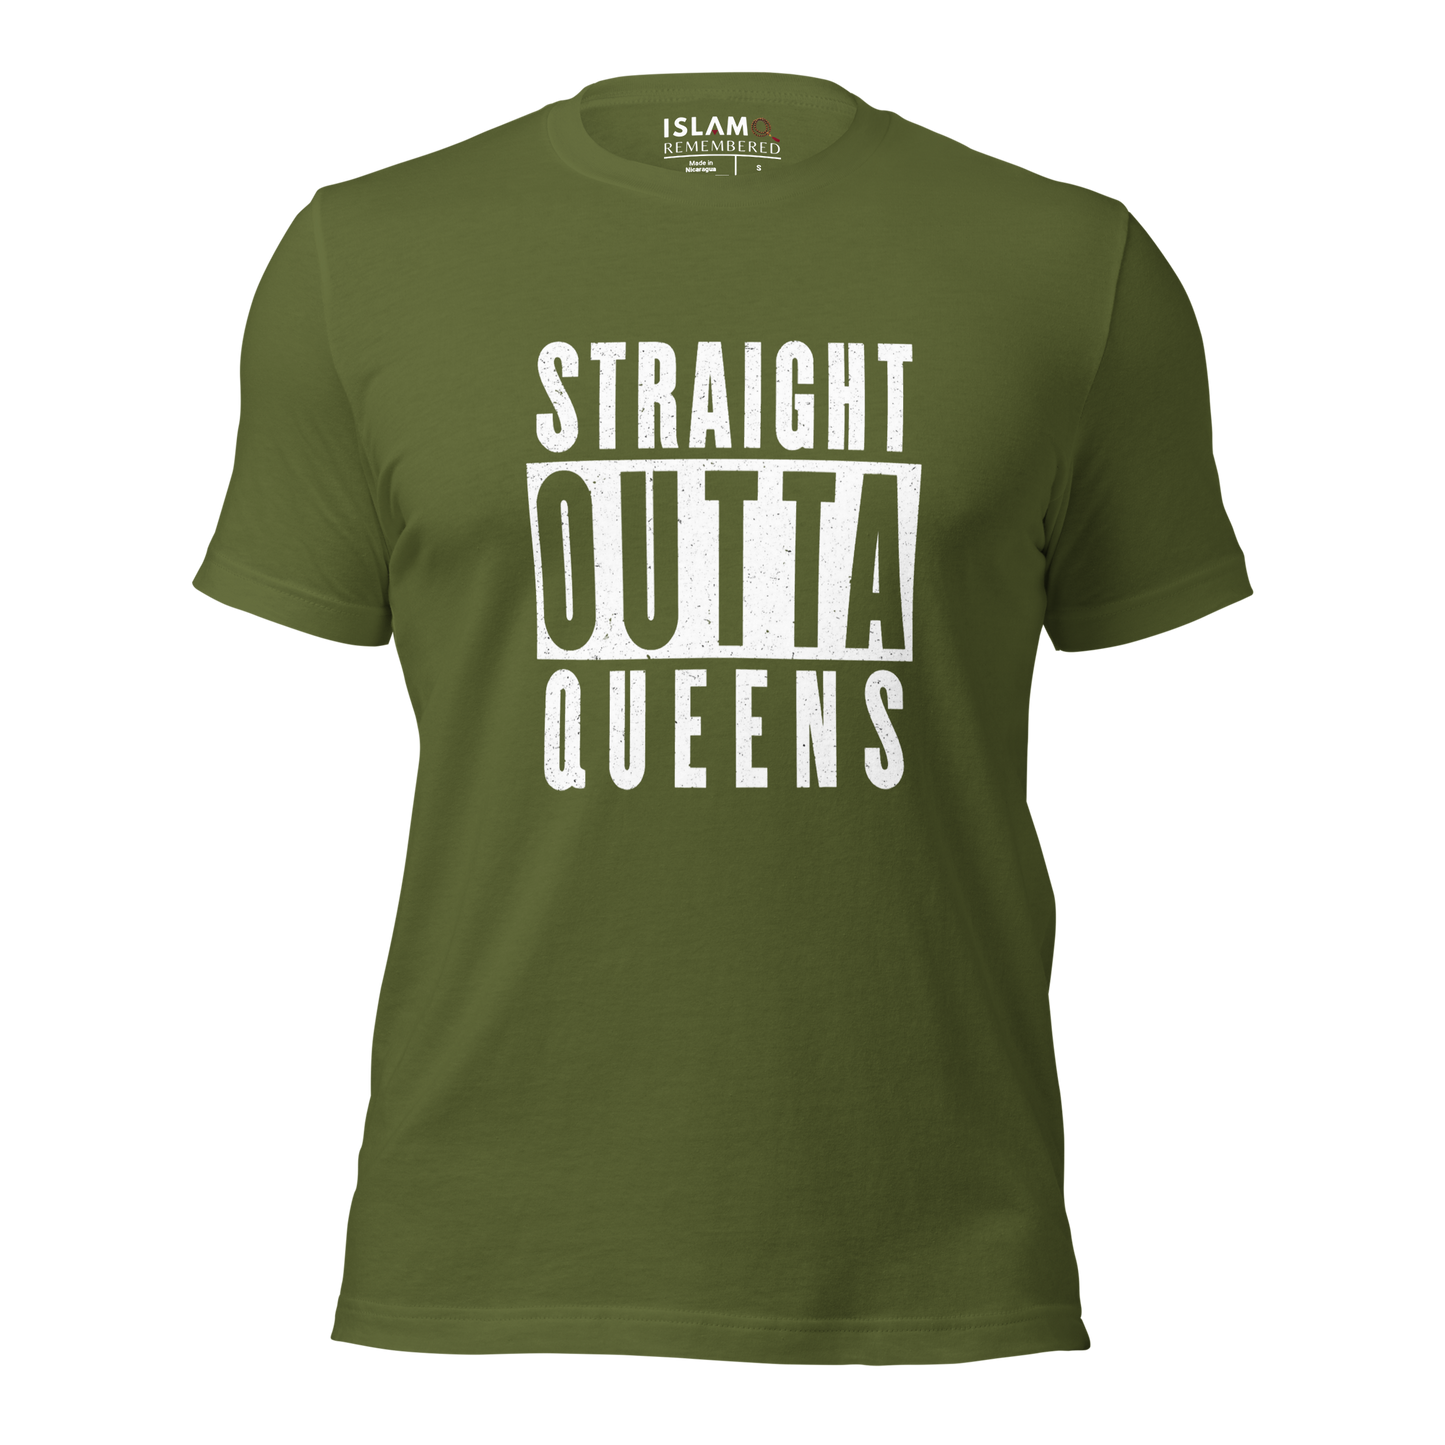 ADULT T-Shirt - STRAIGHT OUTTA QUEENS